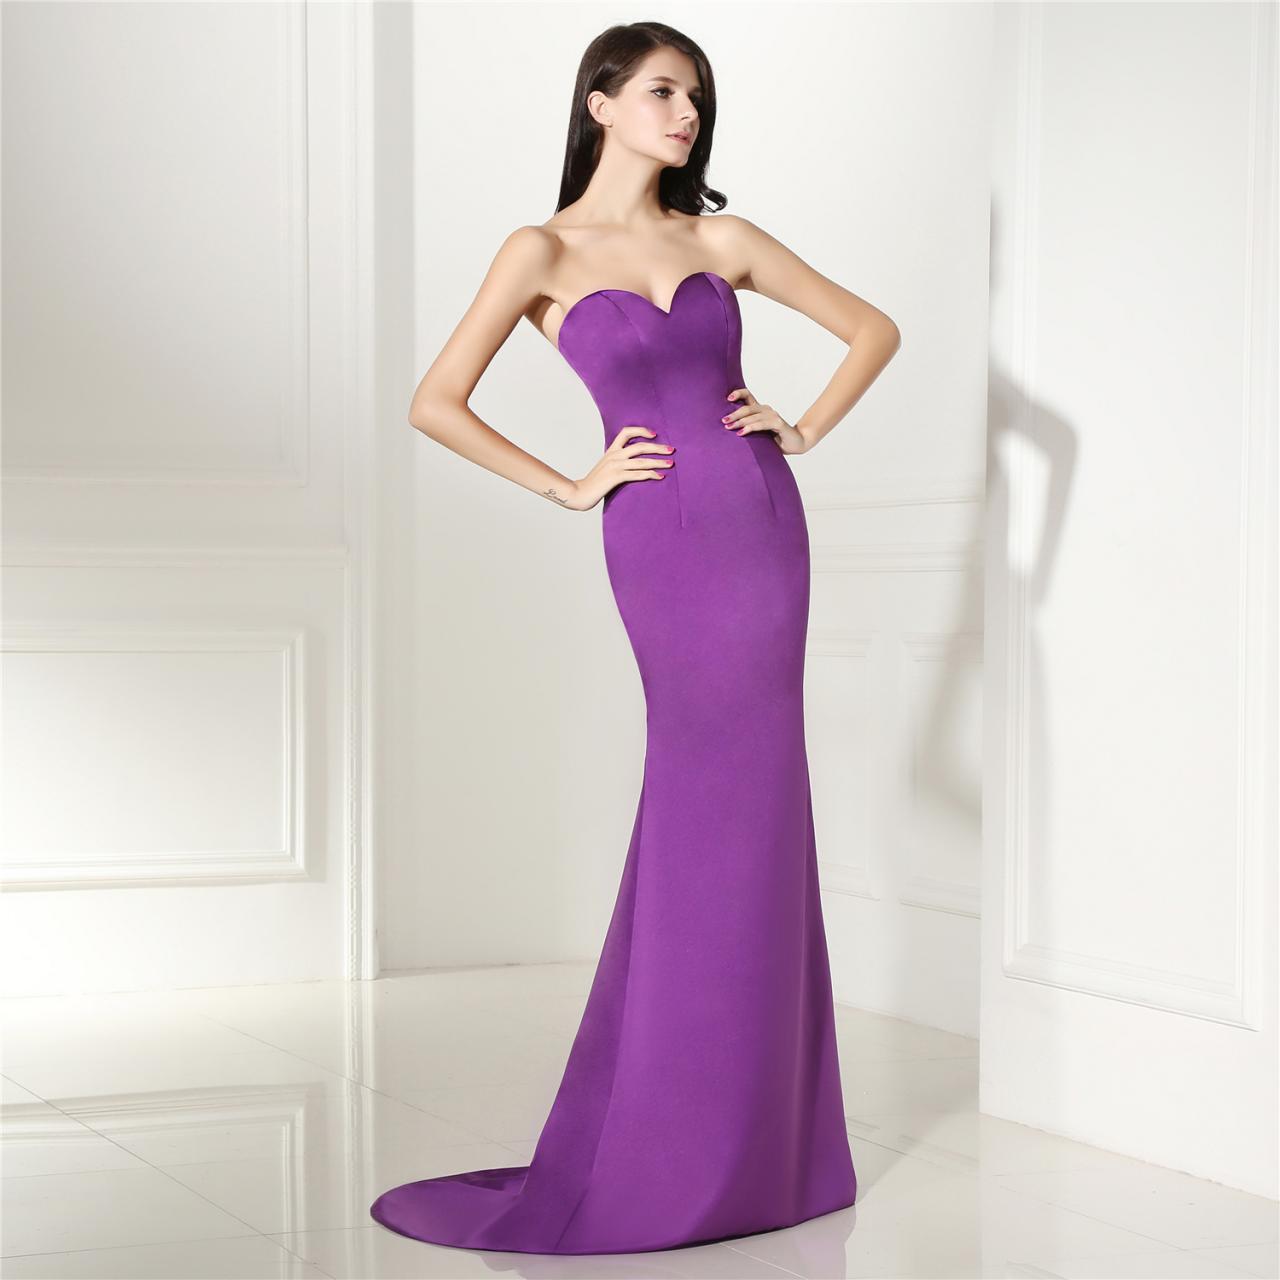 Purple Sweetheart Prom Dresses Mermaid For Women 2018 Formal Evening Gowns